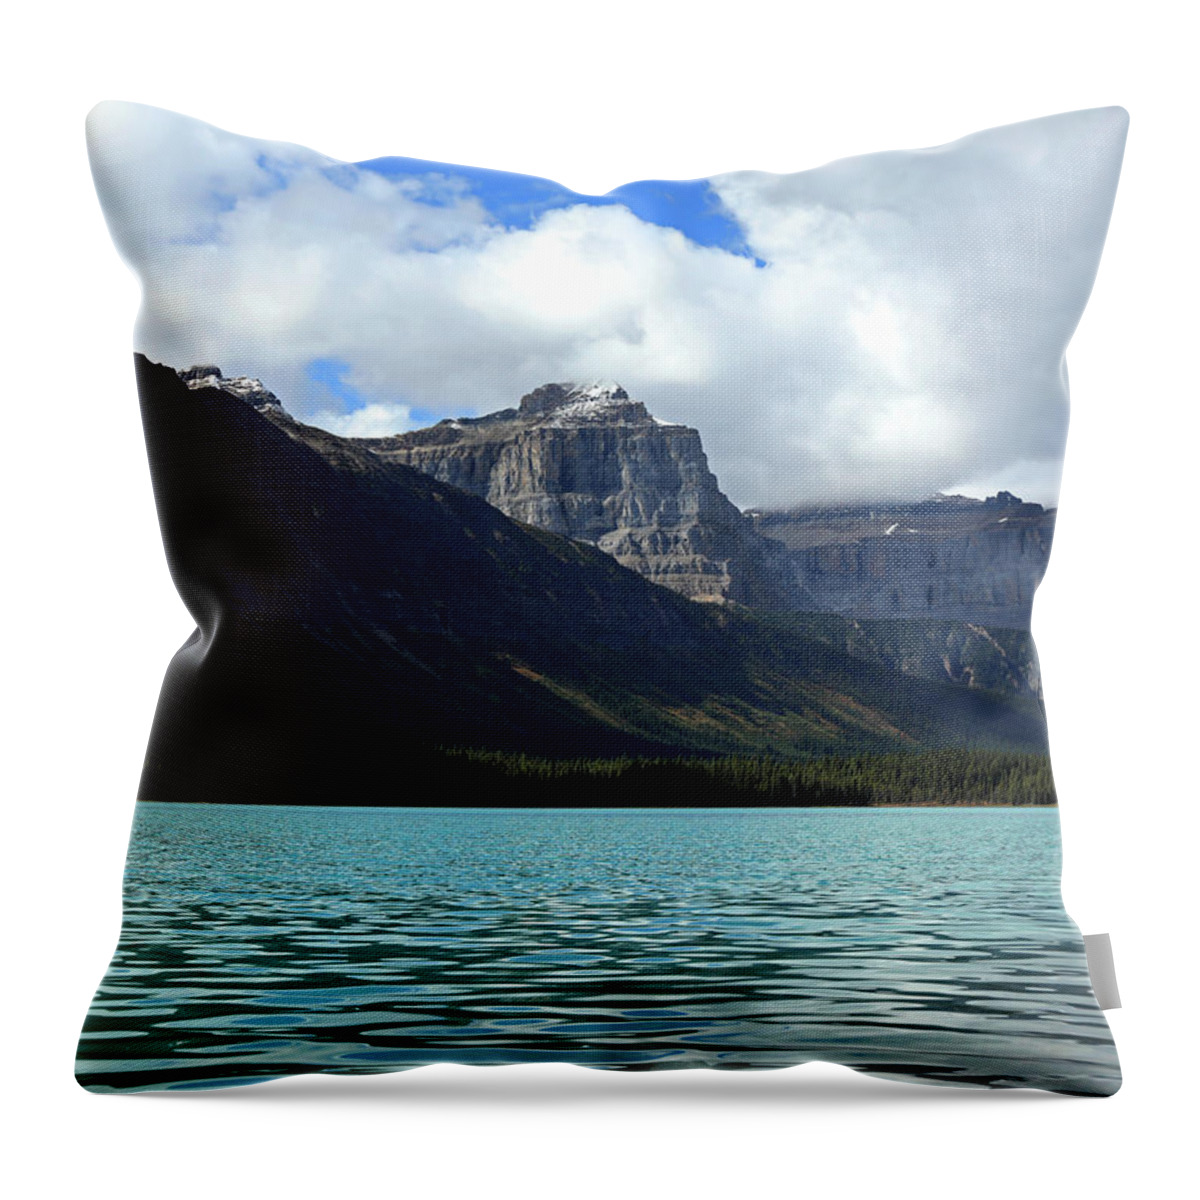 Waterfowl Lake Turquoise Water Throw Pillow featuring the photograph Waterfowl Lake Turquoise Water by Dan Sproul